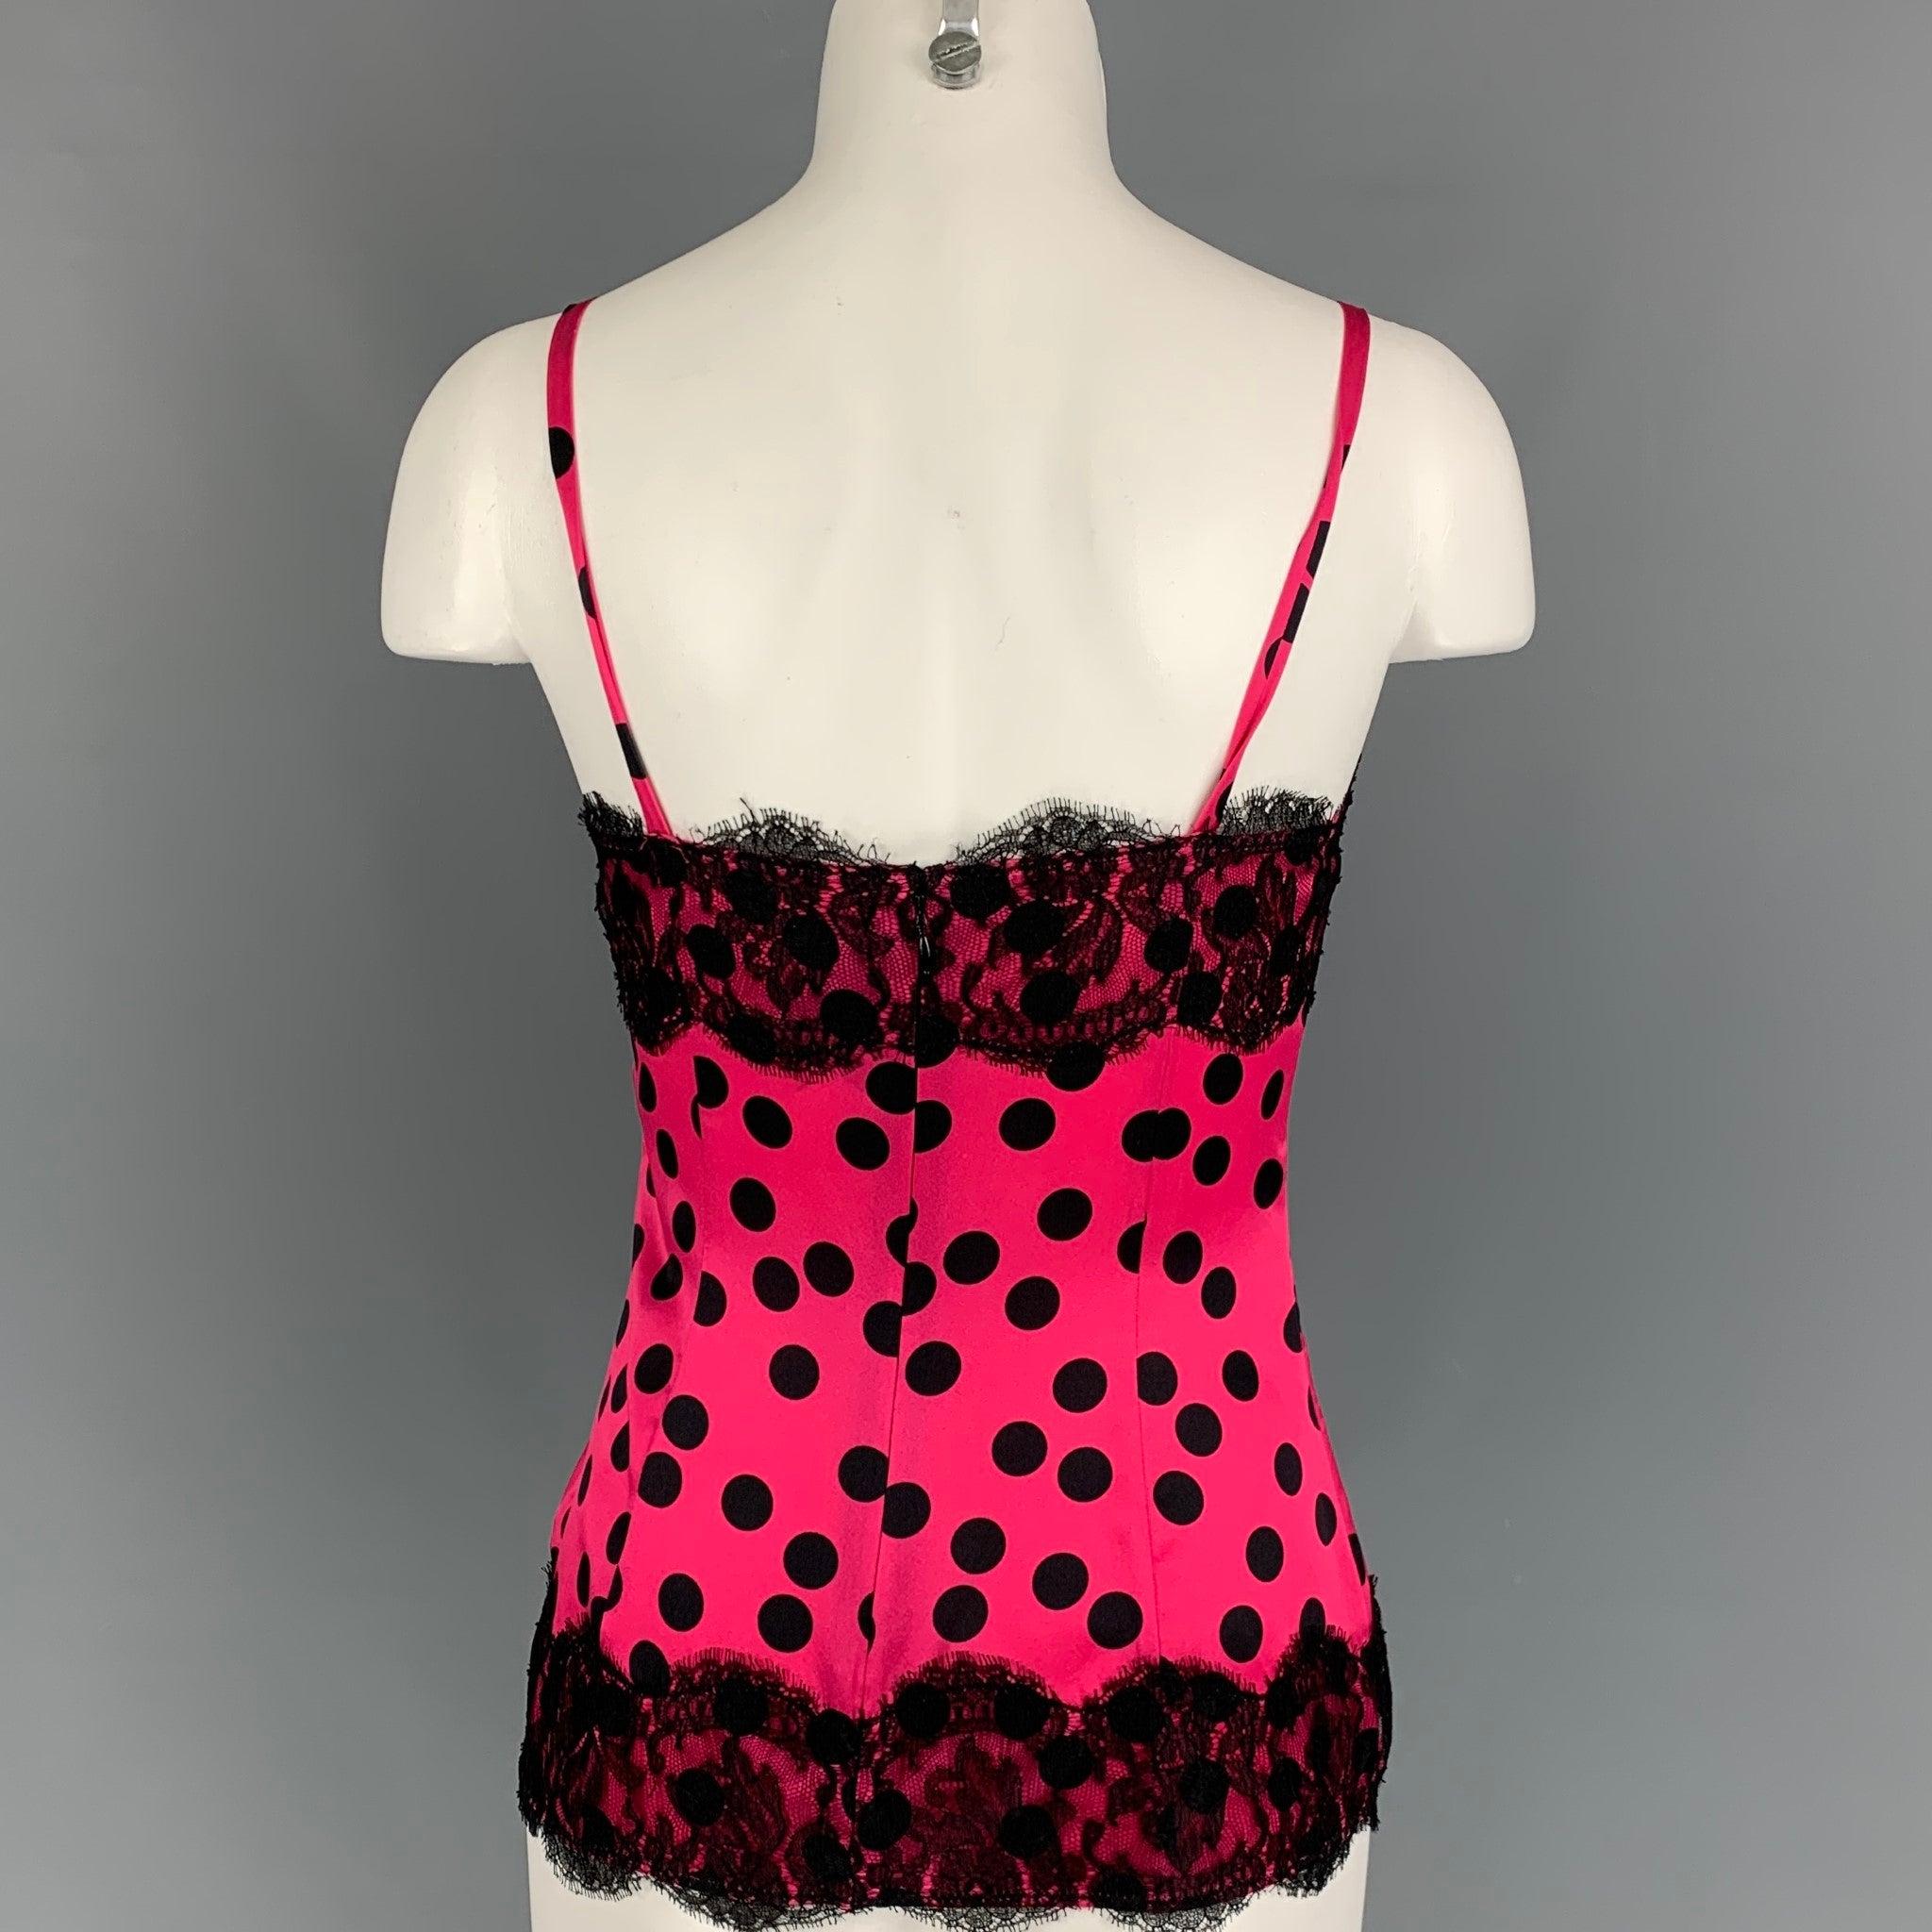 D&G by DOLCE & GABBANA Size 2 Fuchsia Black Silk Polka Dot Casual Top In Good Condition For Sale In San Francisco, CA